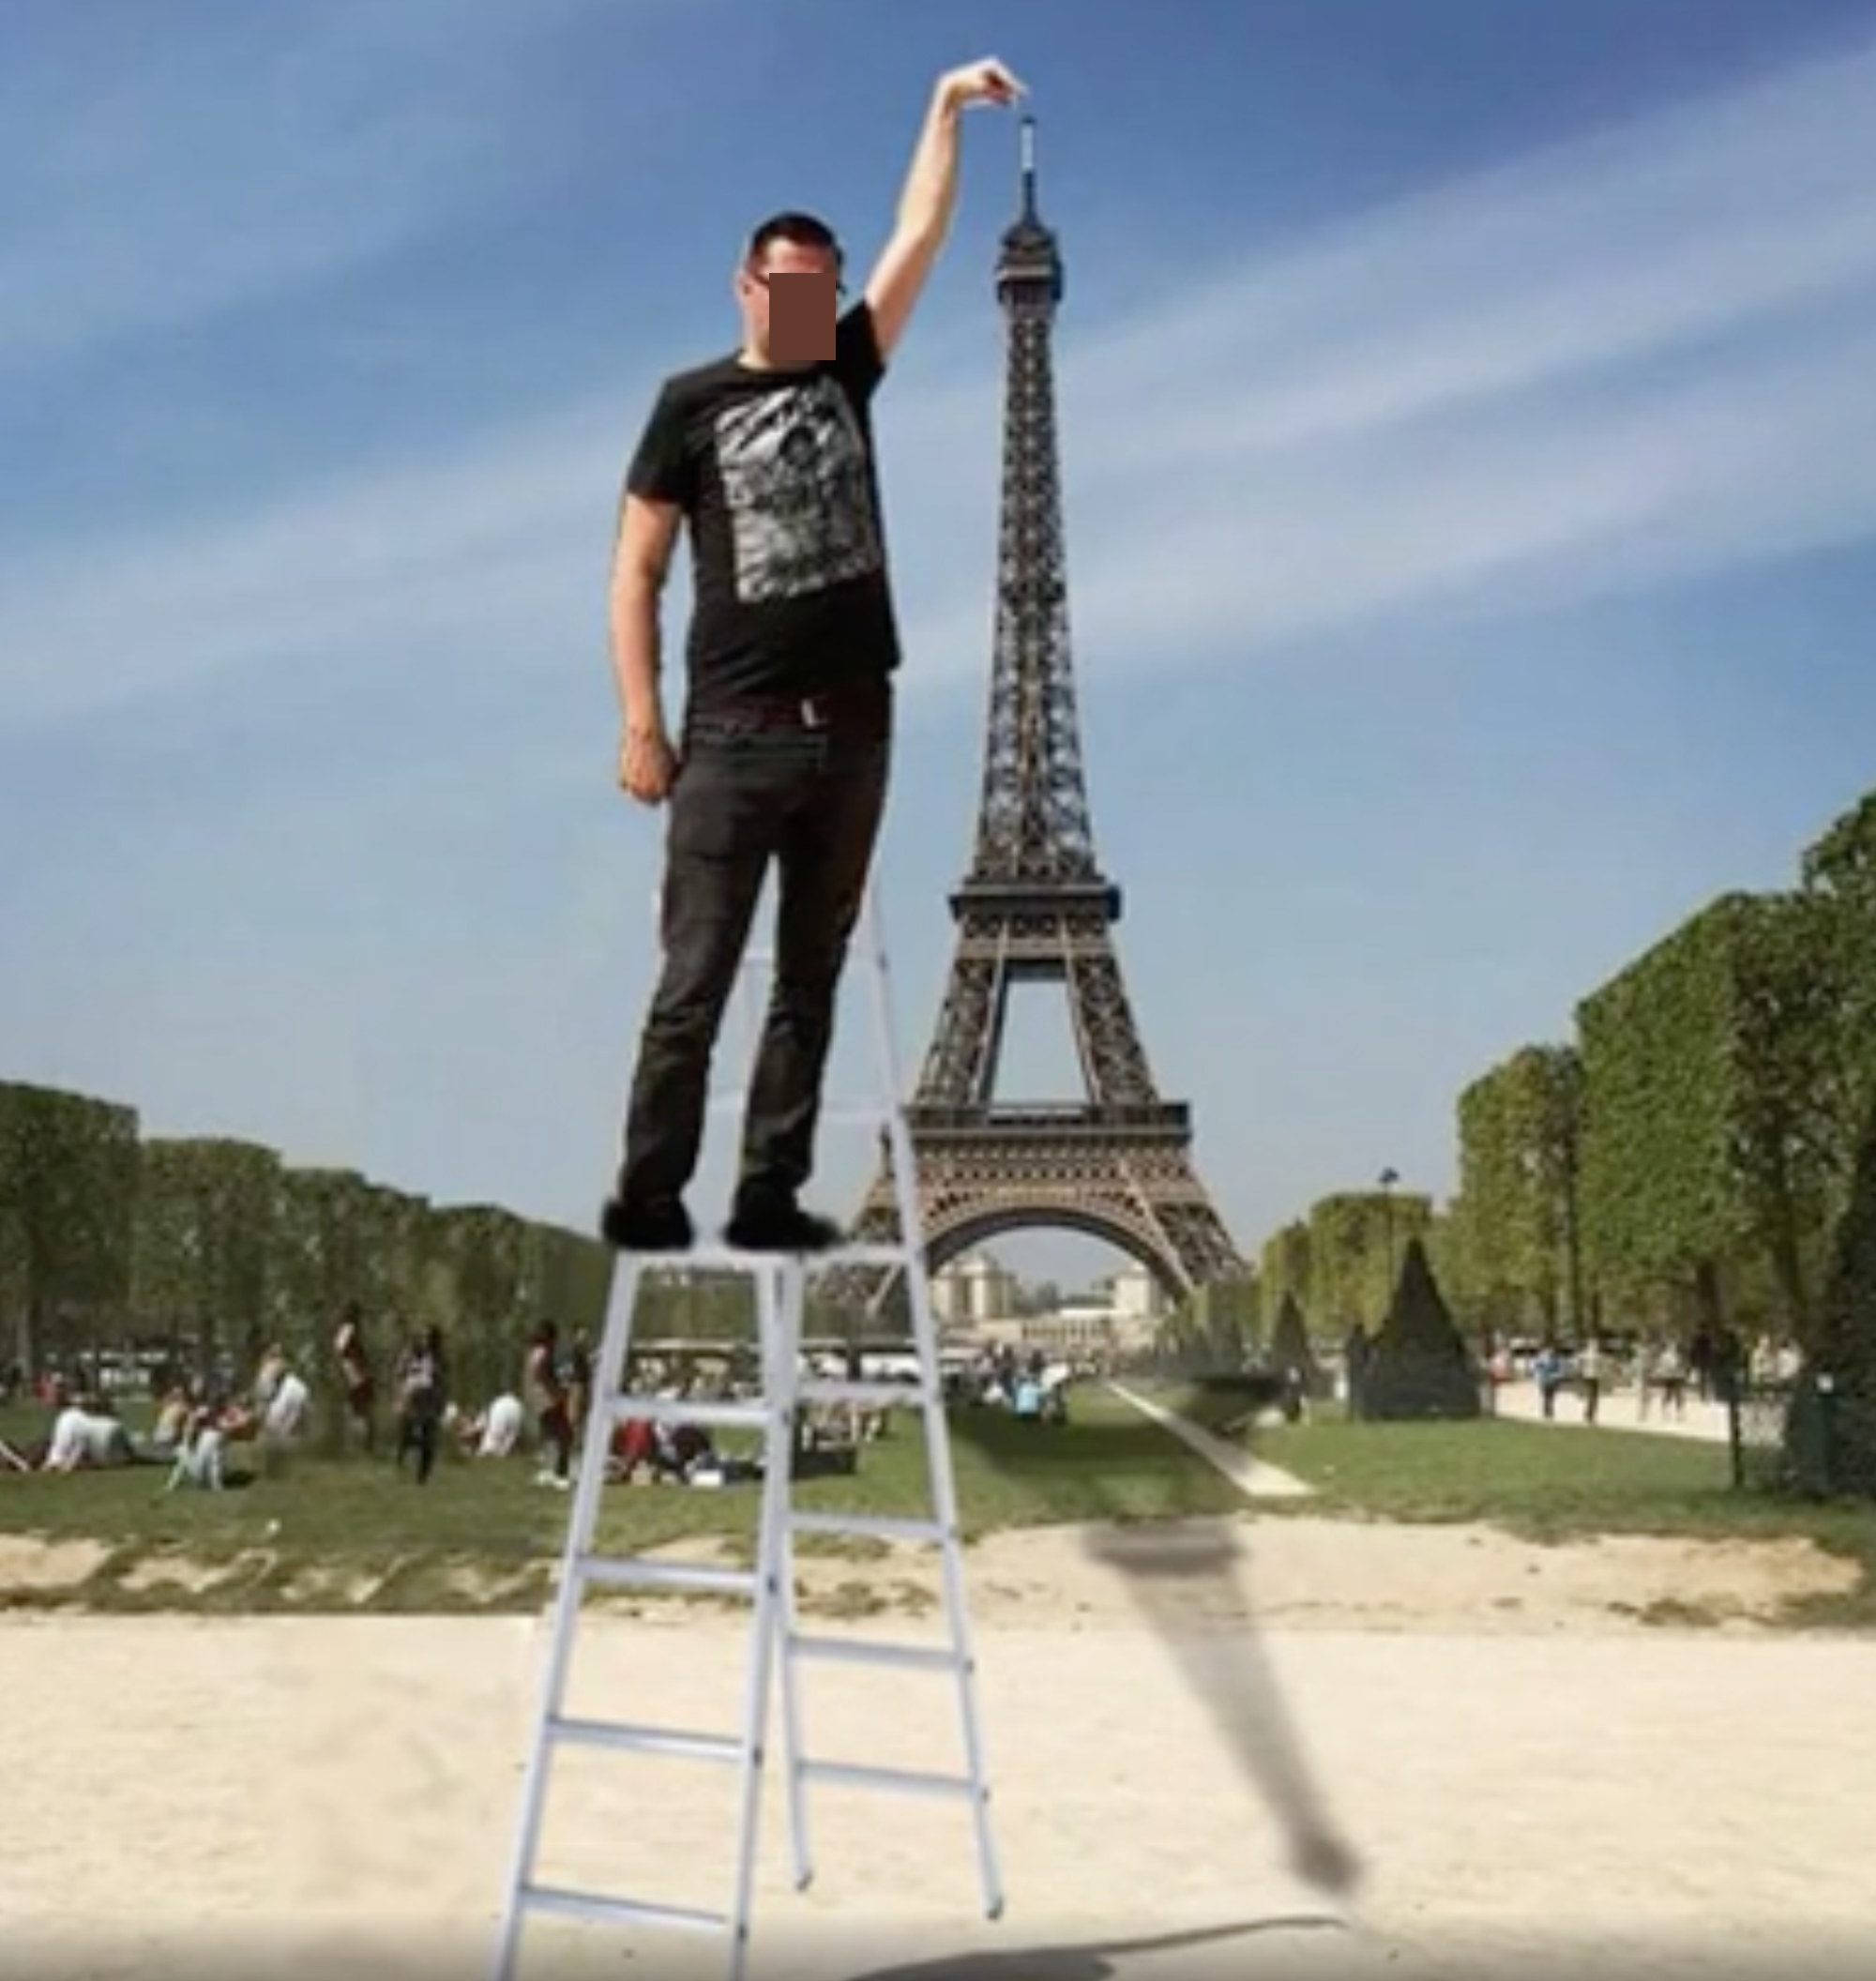 A photoshopped image of a man in front of the Eiffel Tower